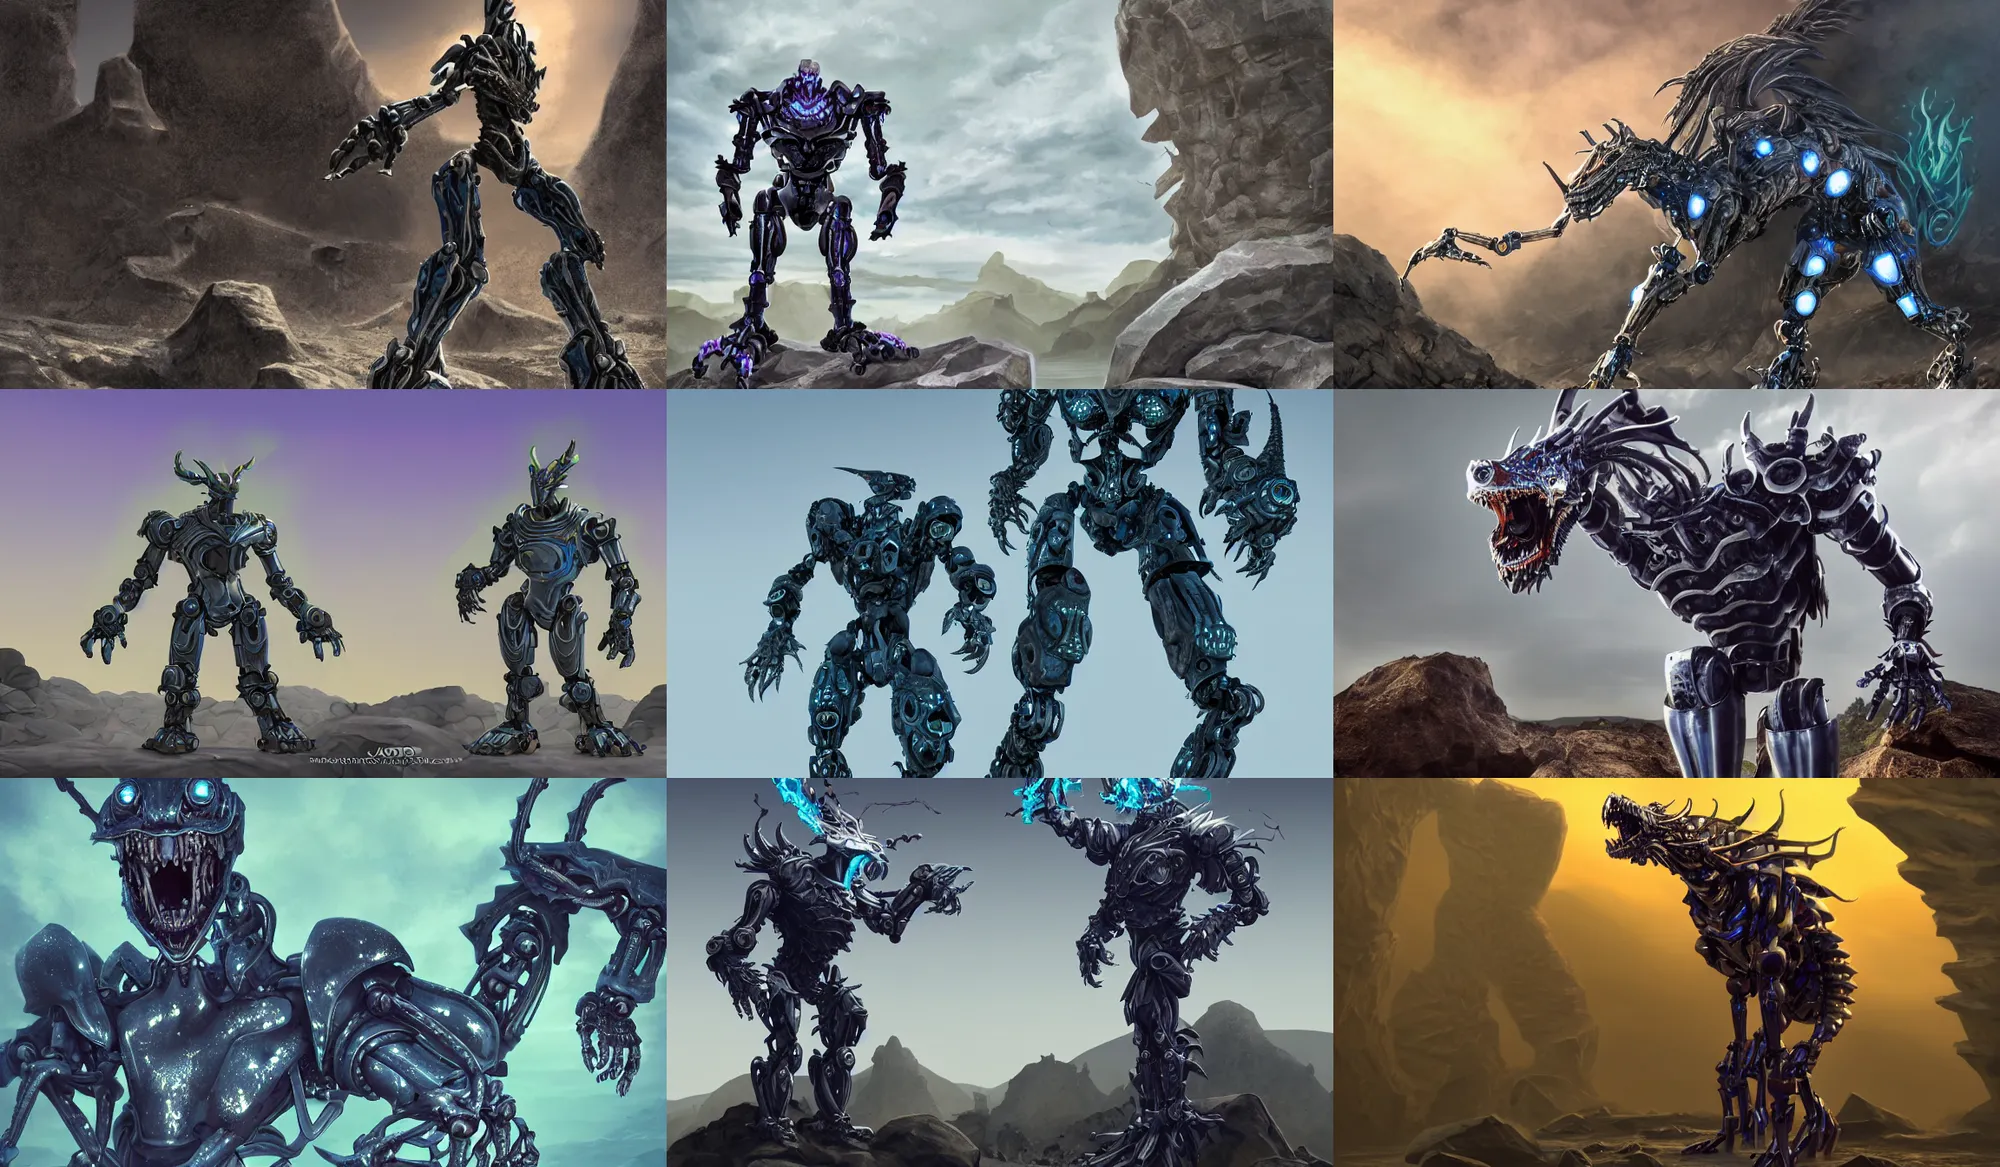 Prompt: Snarling biomechanical anthropomorphic robot dragon armor standing in a rock quarry, high contrast, magic hour photography, good value control, rule of thirds, centered, science fiction, silver and blue color schemes, rubber suit, ultra realistic, glowing eyes, glowing mouth, low purple flame, high quality, 4k, concept art, illustration, League of Legends Character Splash Art